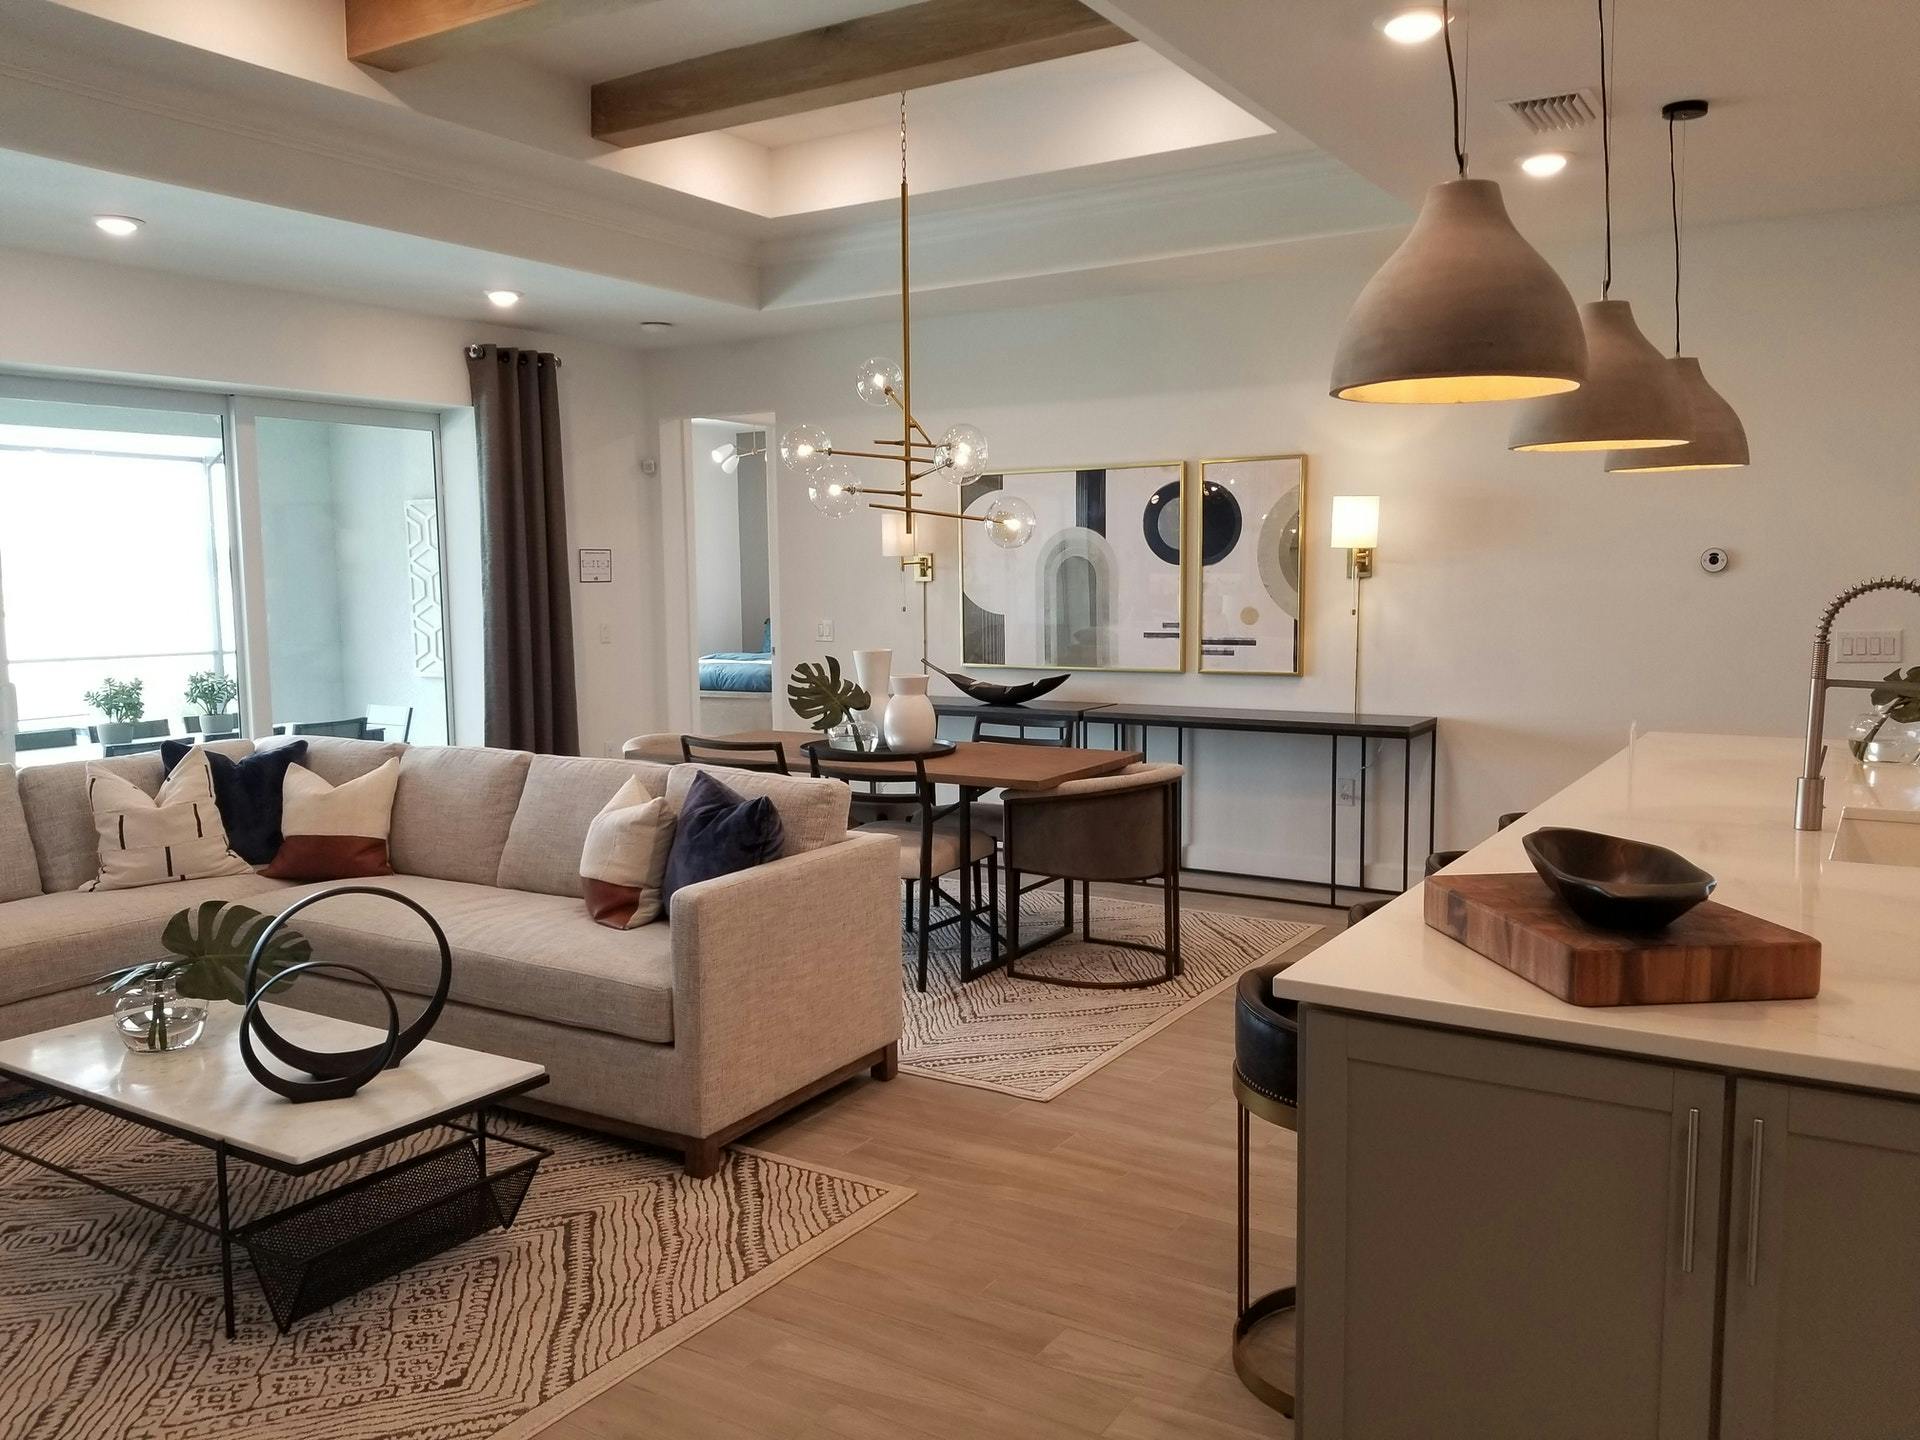 Top 5 Virtual Staging Companies for Real Estate Sales in 2022